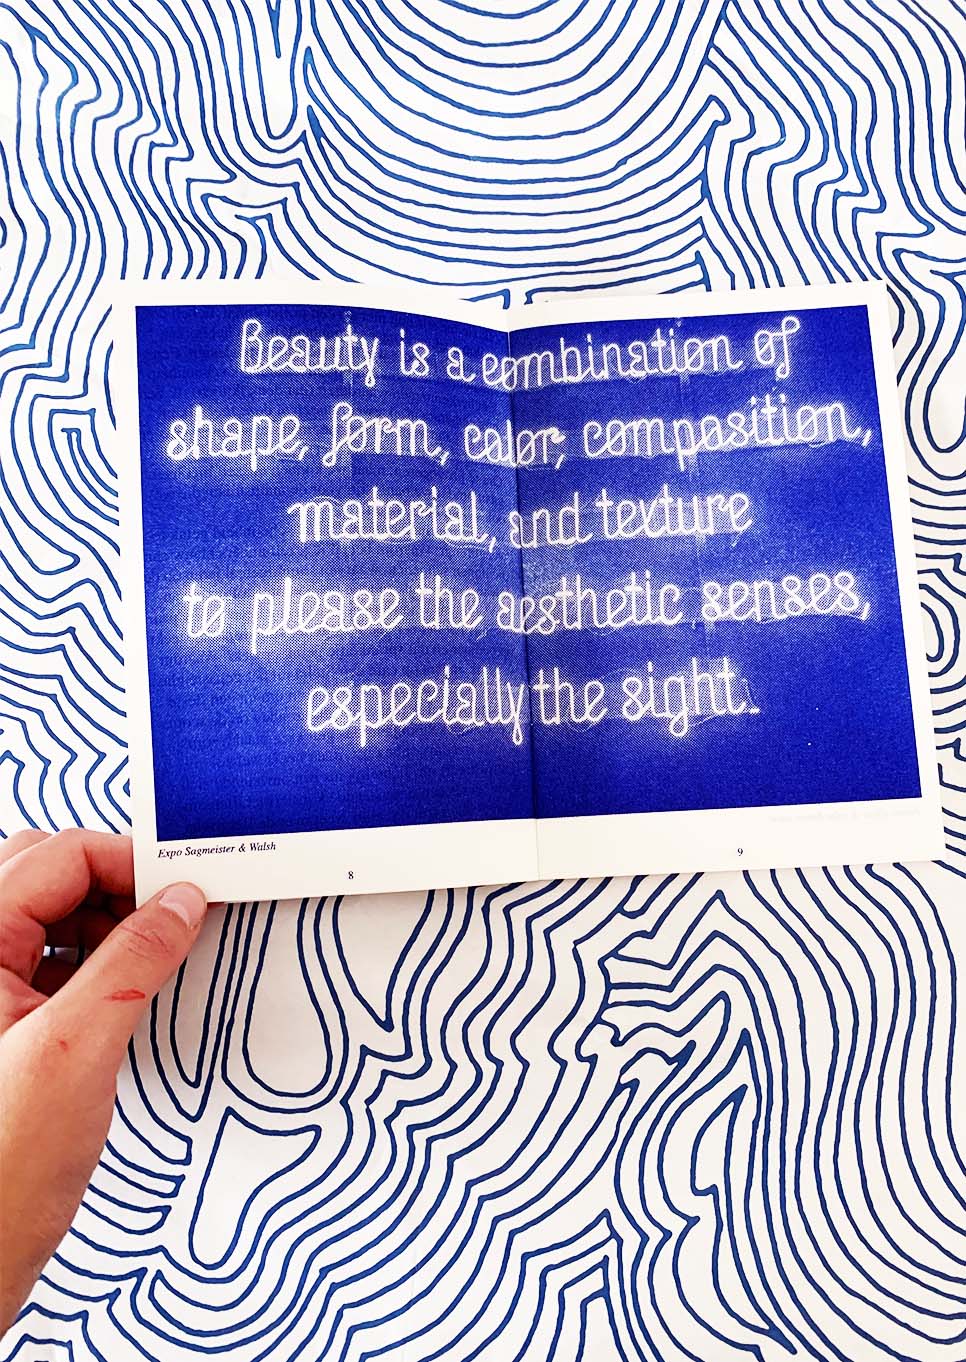 About Beauty, risograph, Manon Lambeens